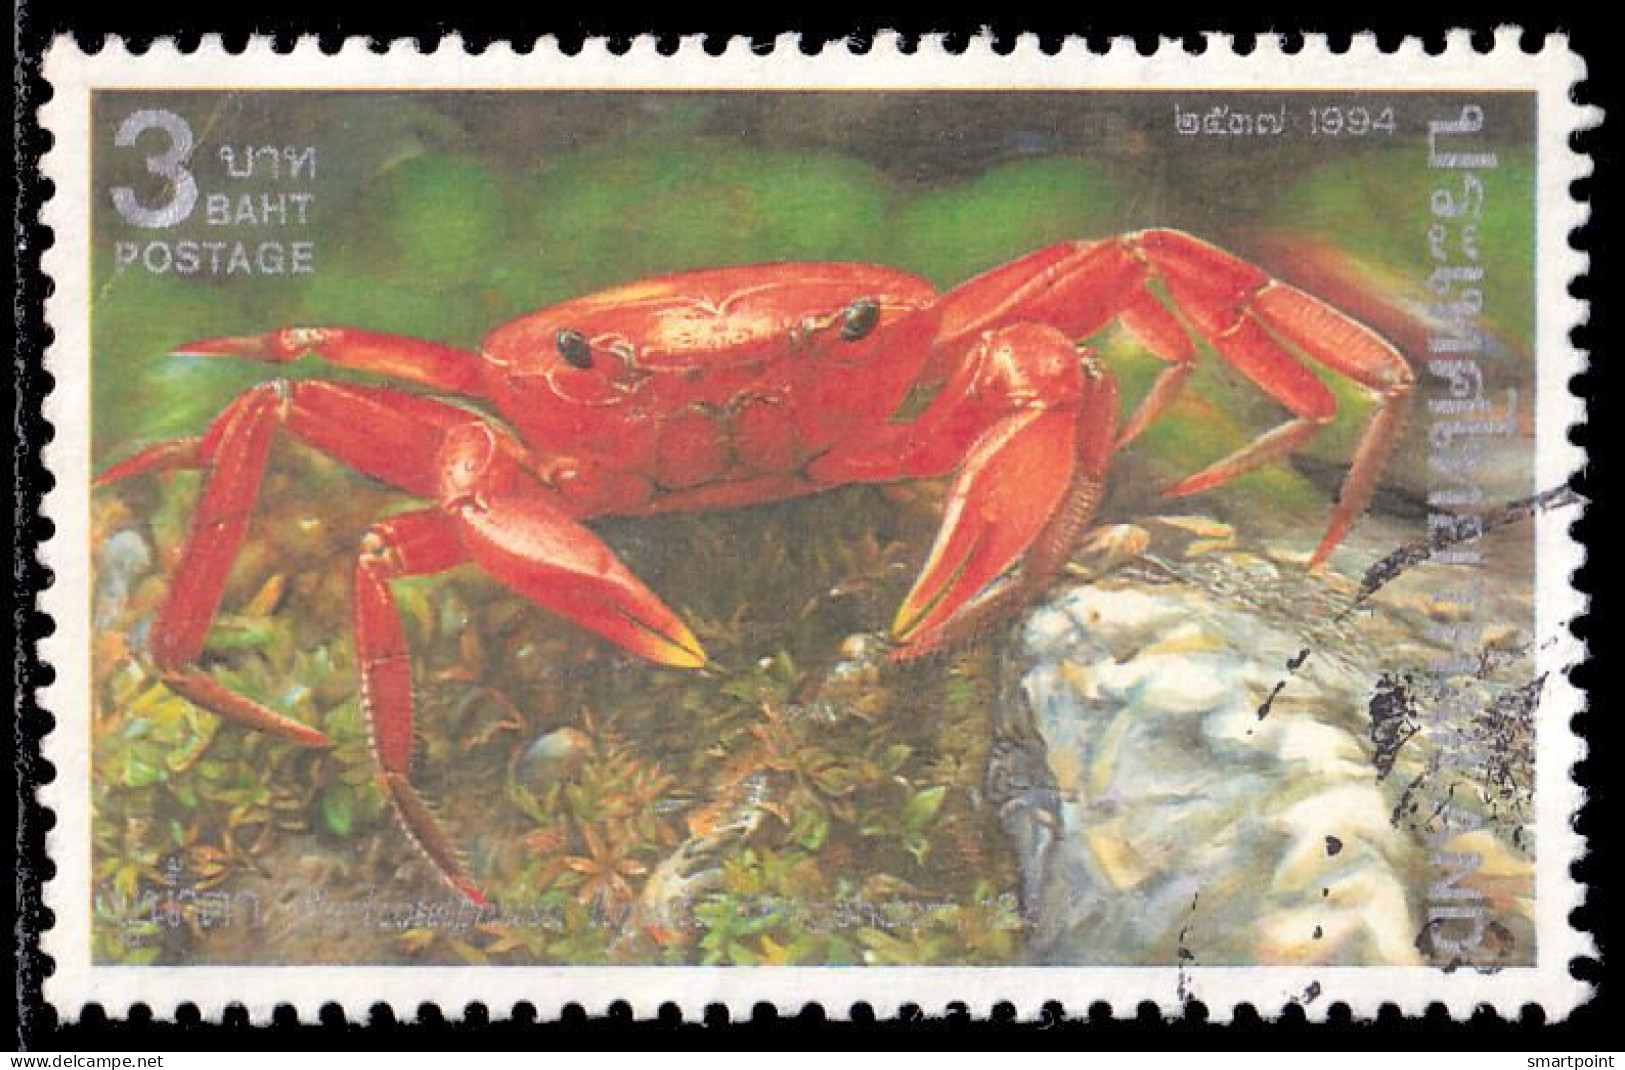 Thailand Stamp 1994 Crabs (2nd Series) 3 Baht - Used - Thailand